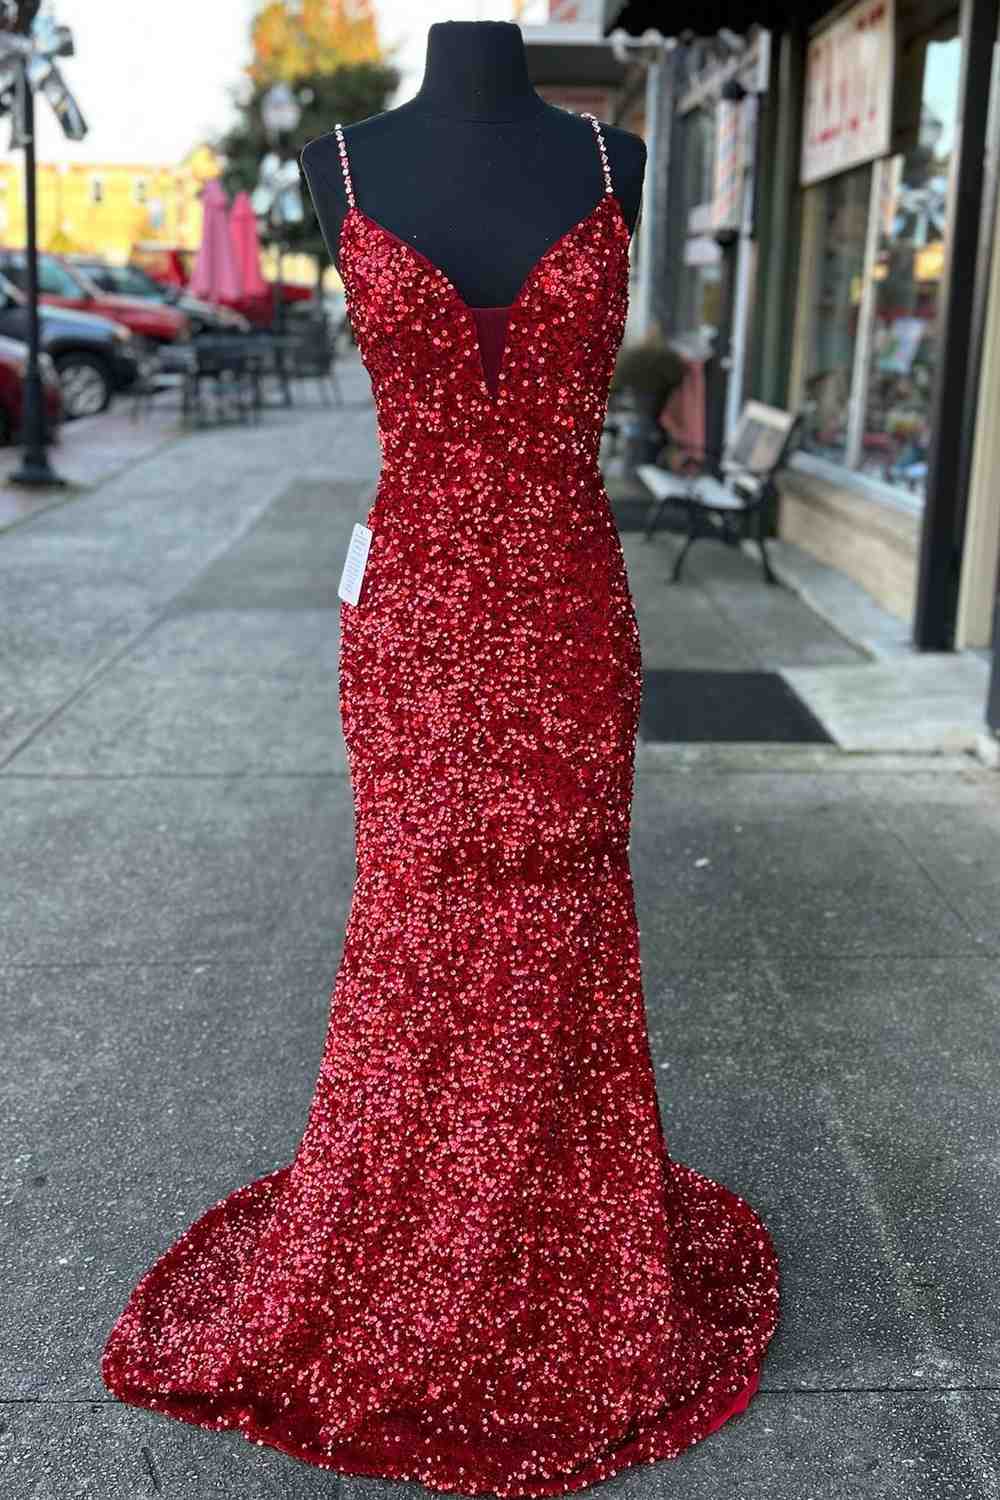 Beaded Straps Burgundy Sequins Mermaid Long Corset Prom Dress,Evening Dresses Elegant outfit, Bachelorette Party Outfit